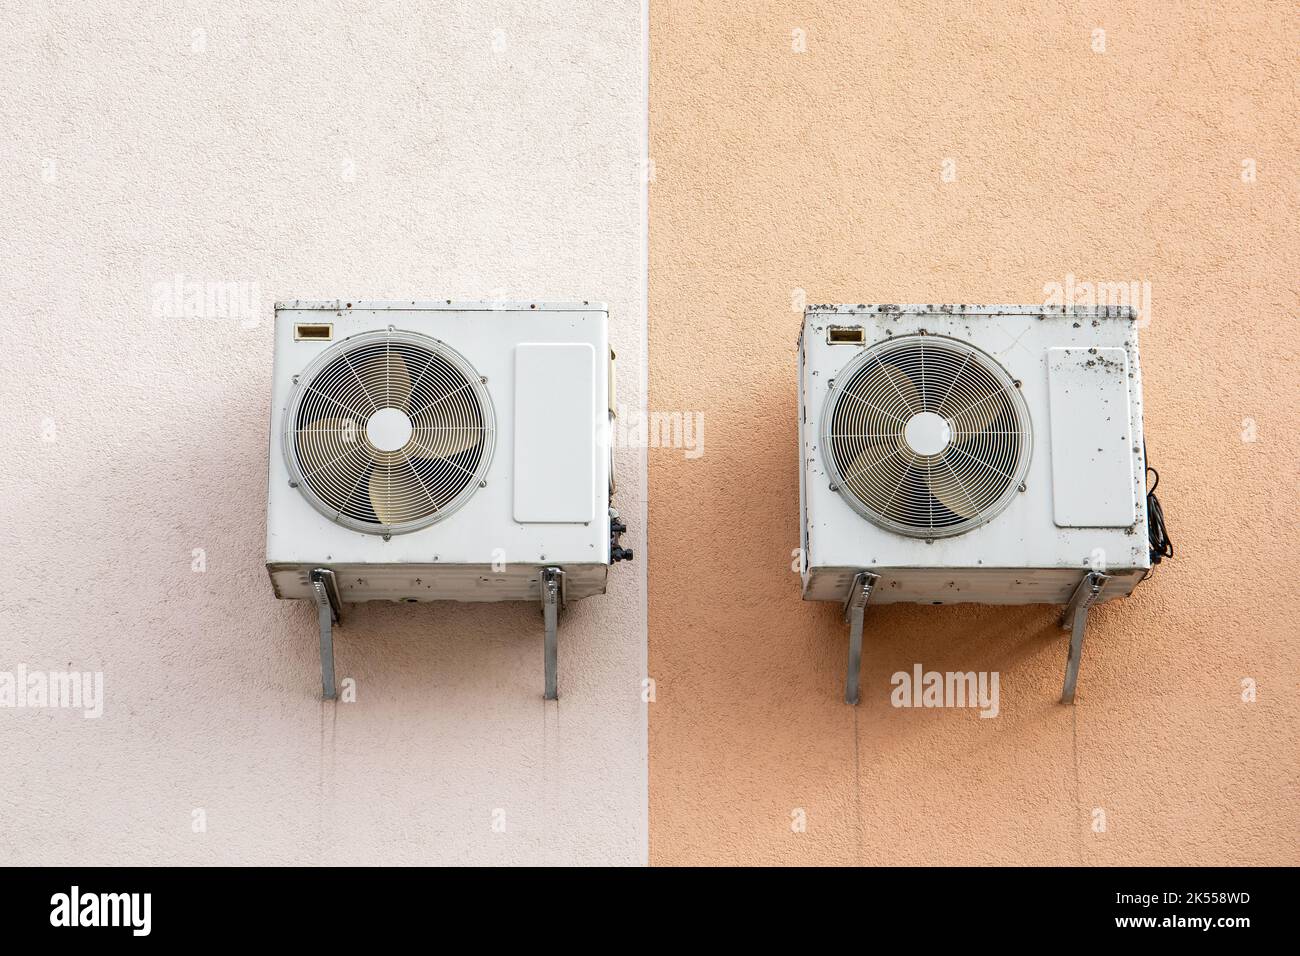 Air heat pumps or conditioners at the building facade. Stock Photo